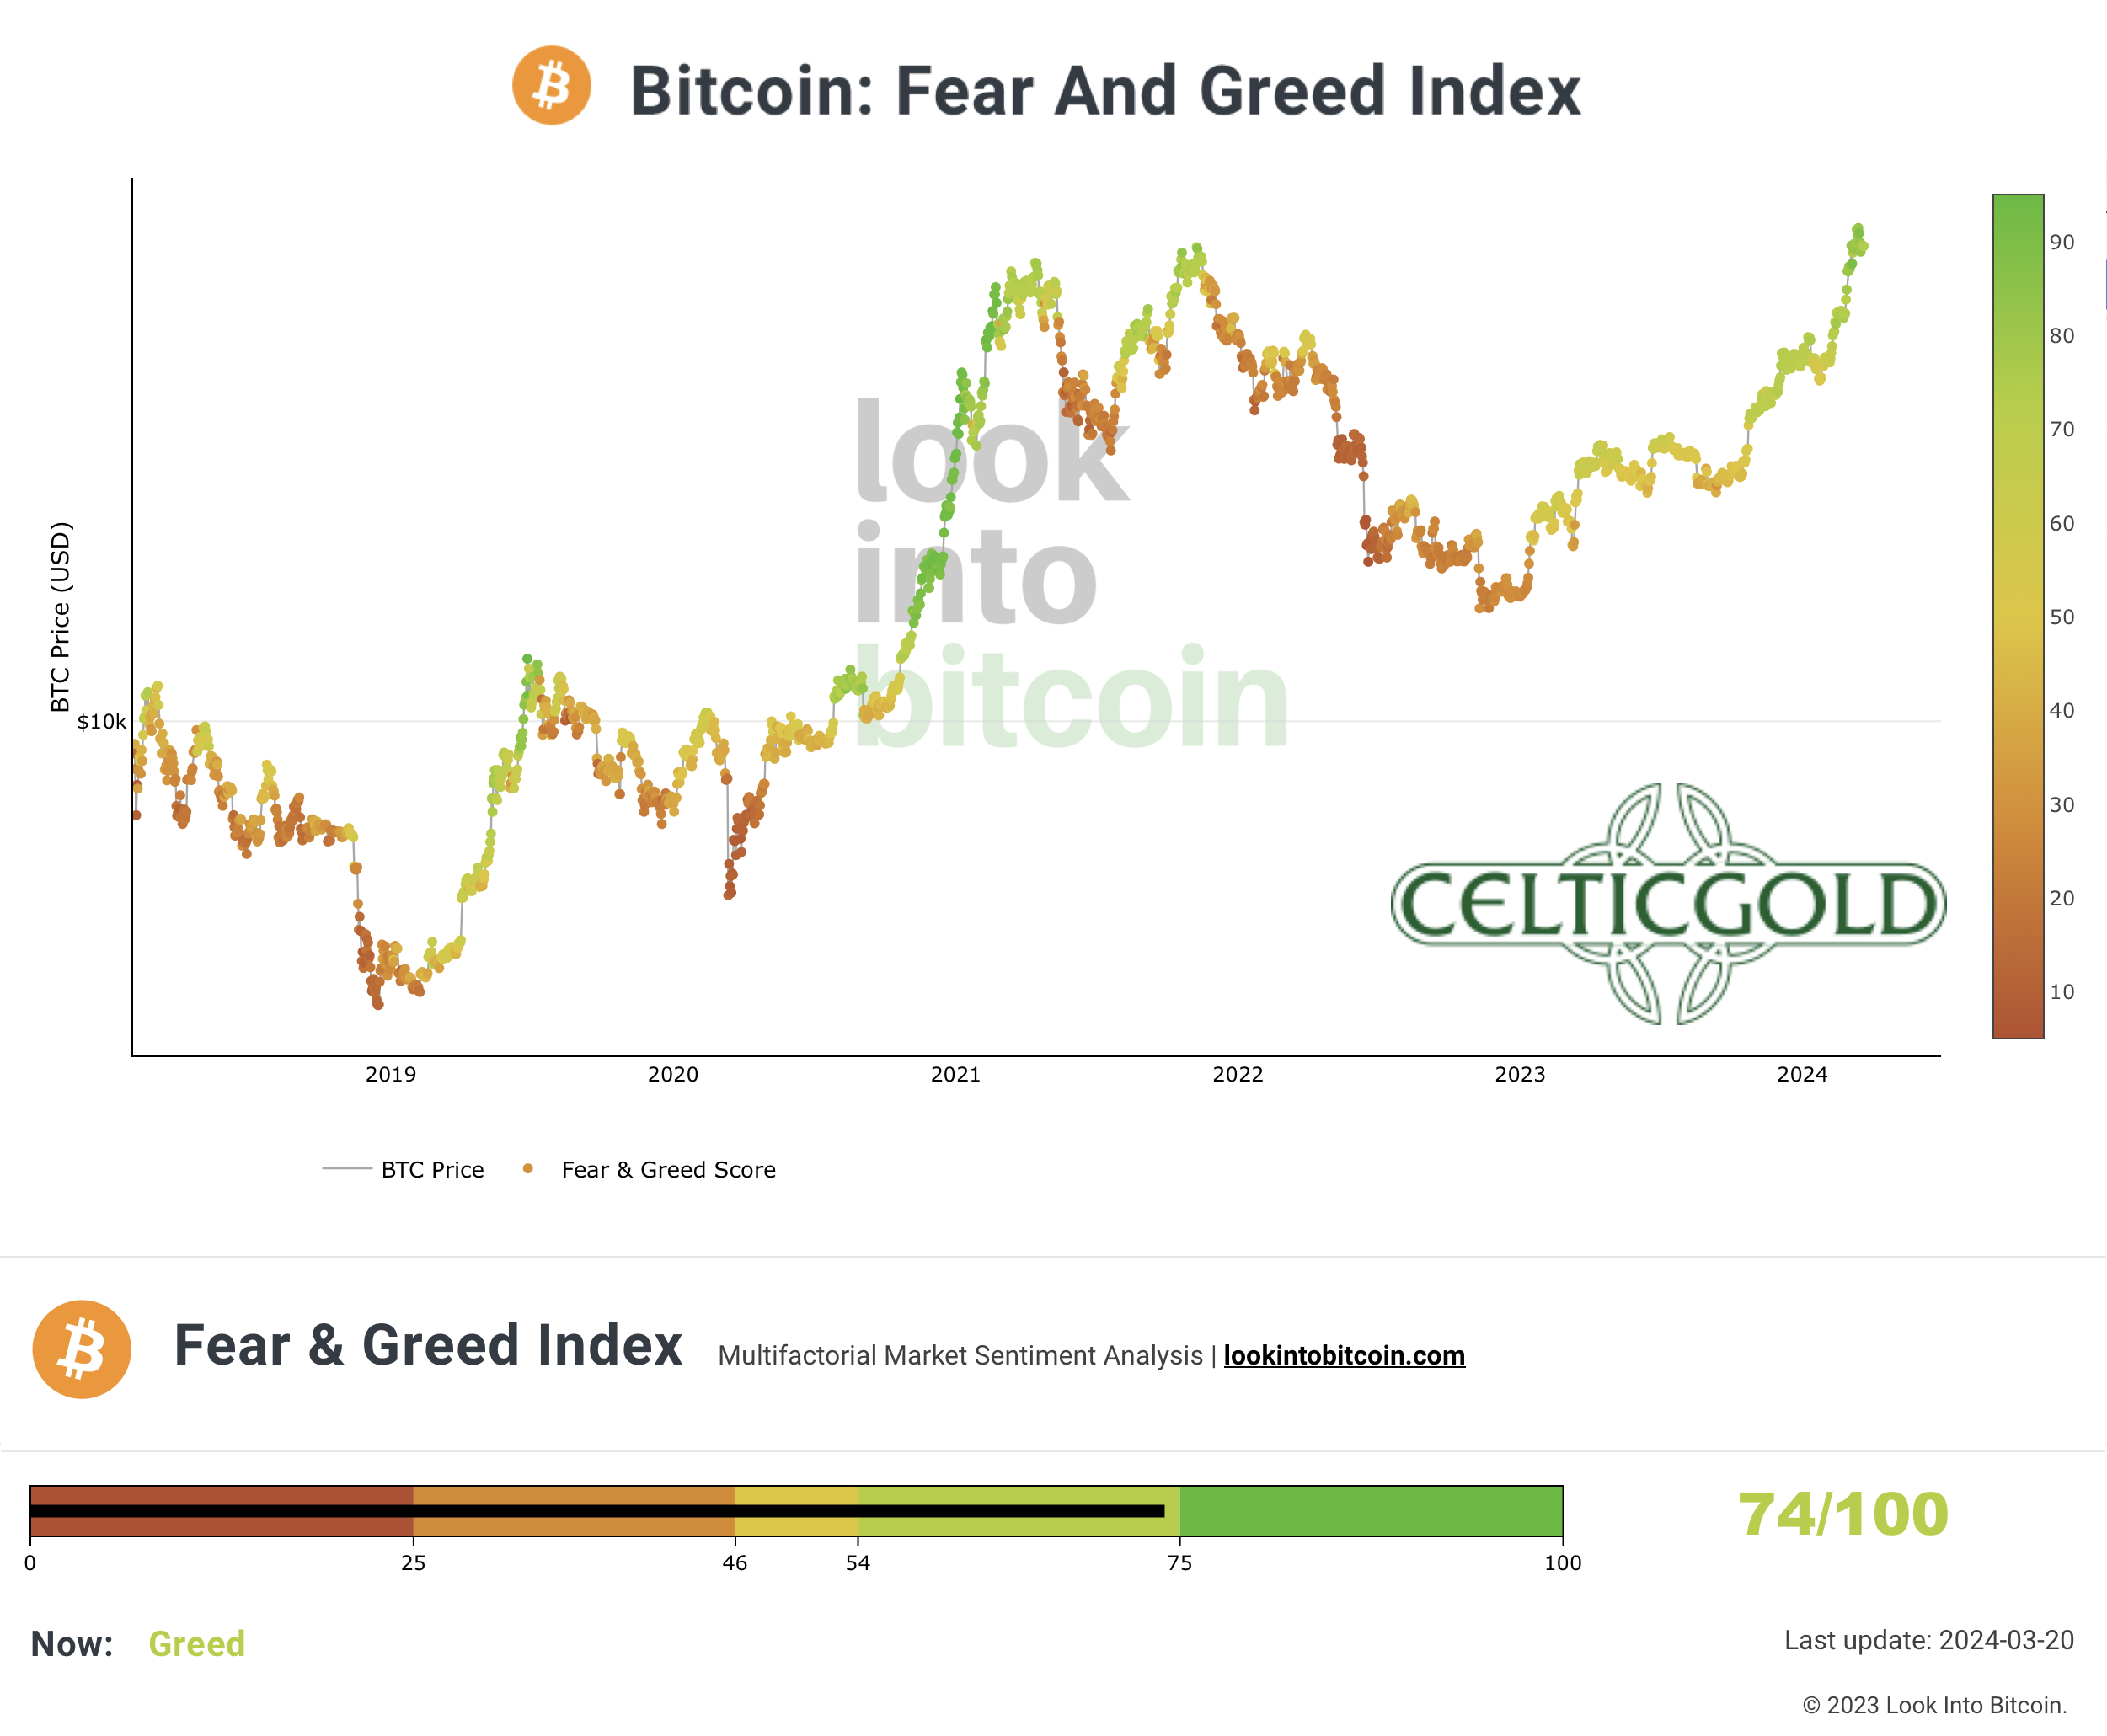 Crypto Fear & Greed Index long term, as of March 20th, 2024